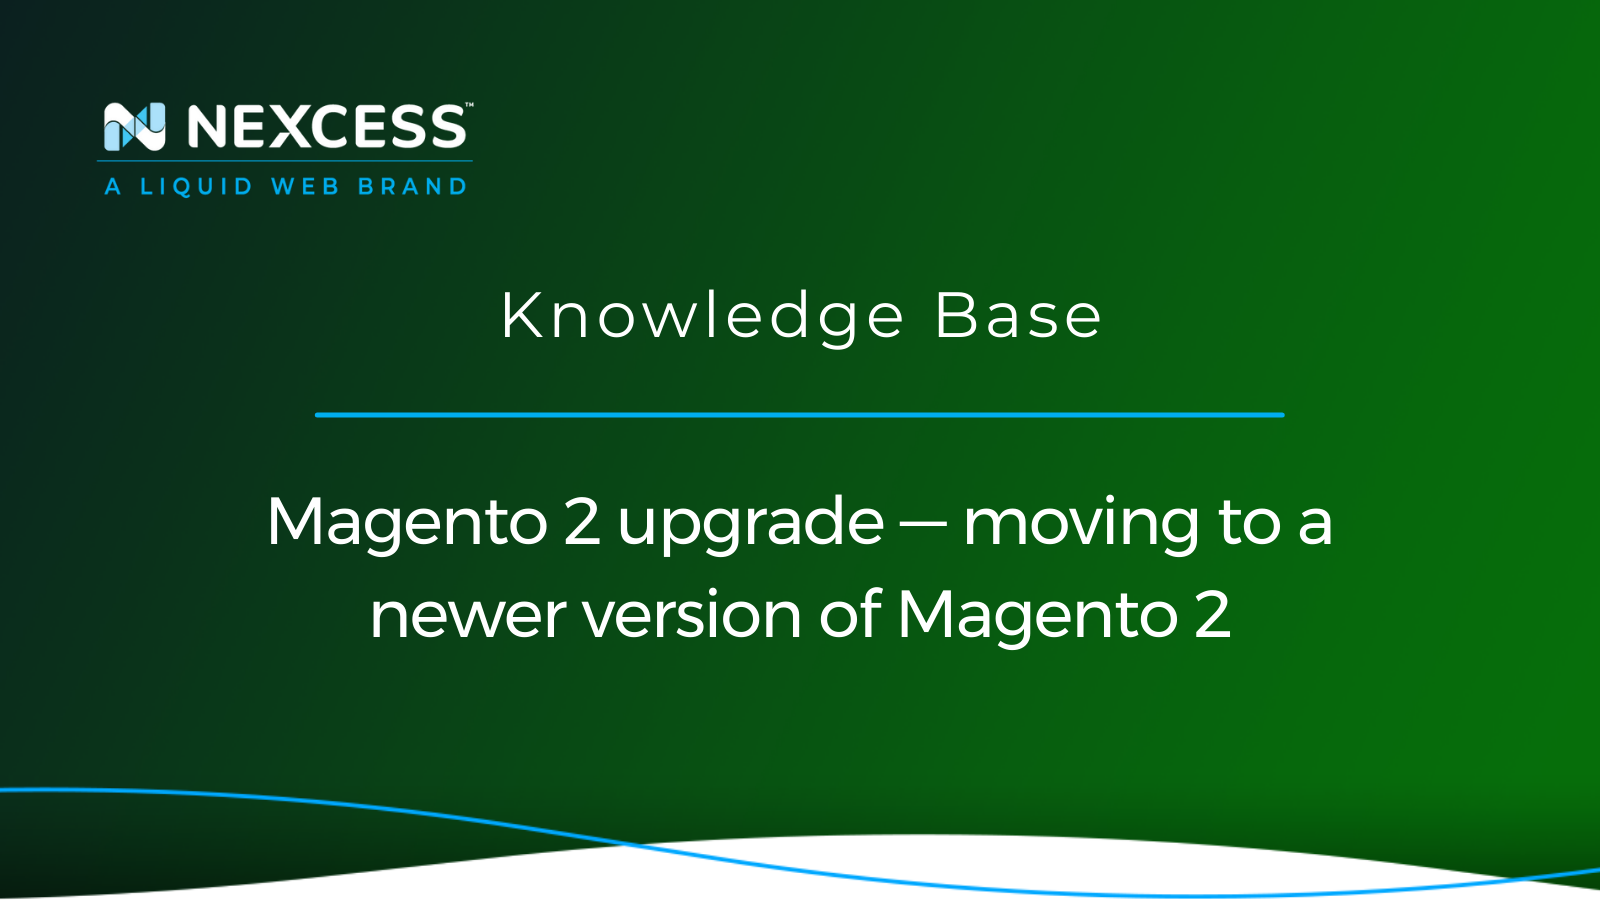 Magento 2 upgrade — moving to a newer version of Magento 2